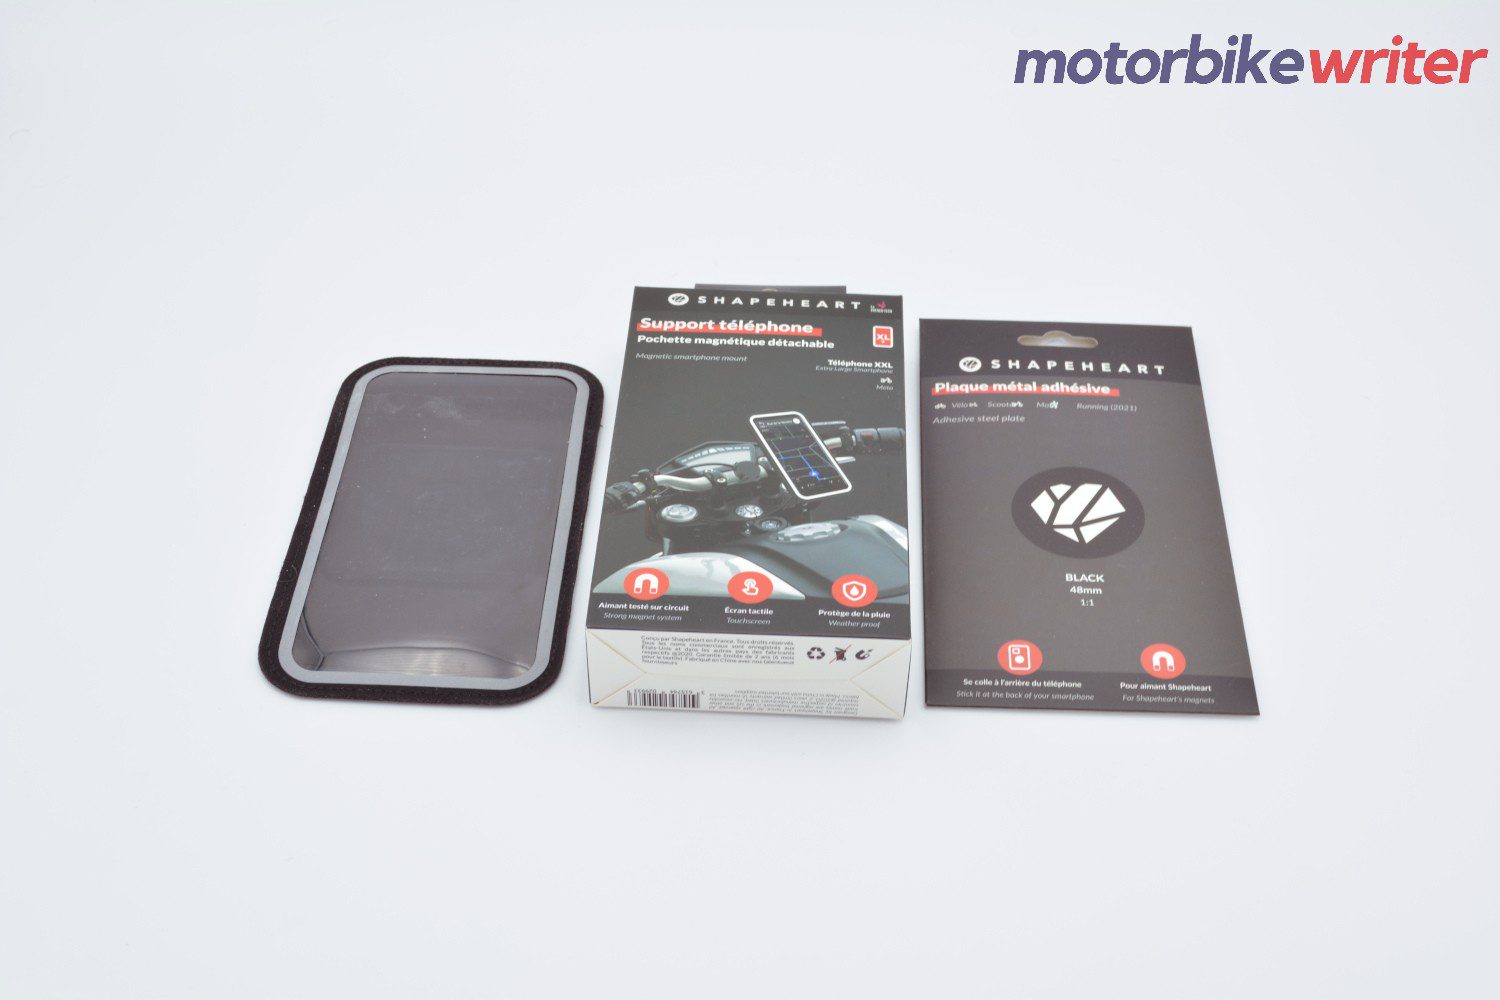 Shapeheart Classic Handlebar Phone Mounting System Box and Contents